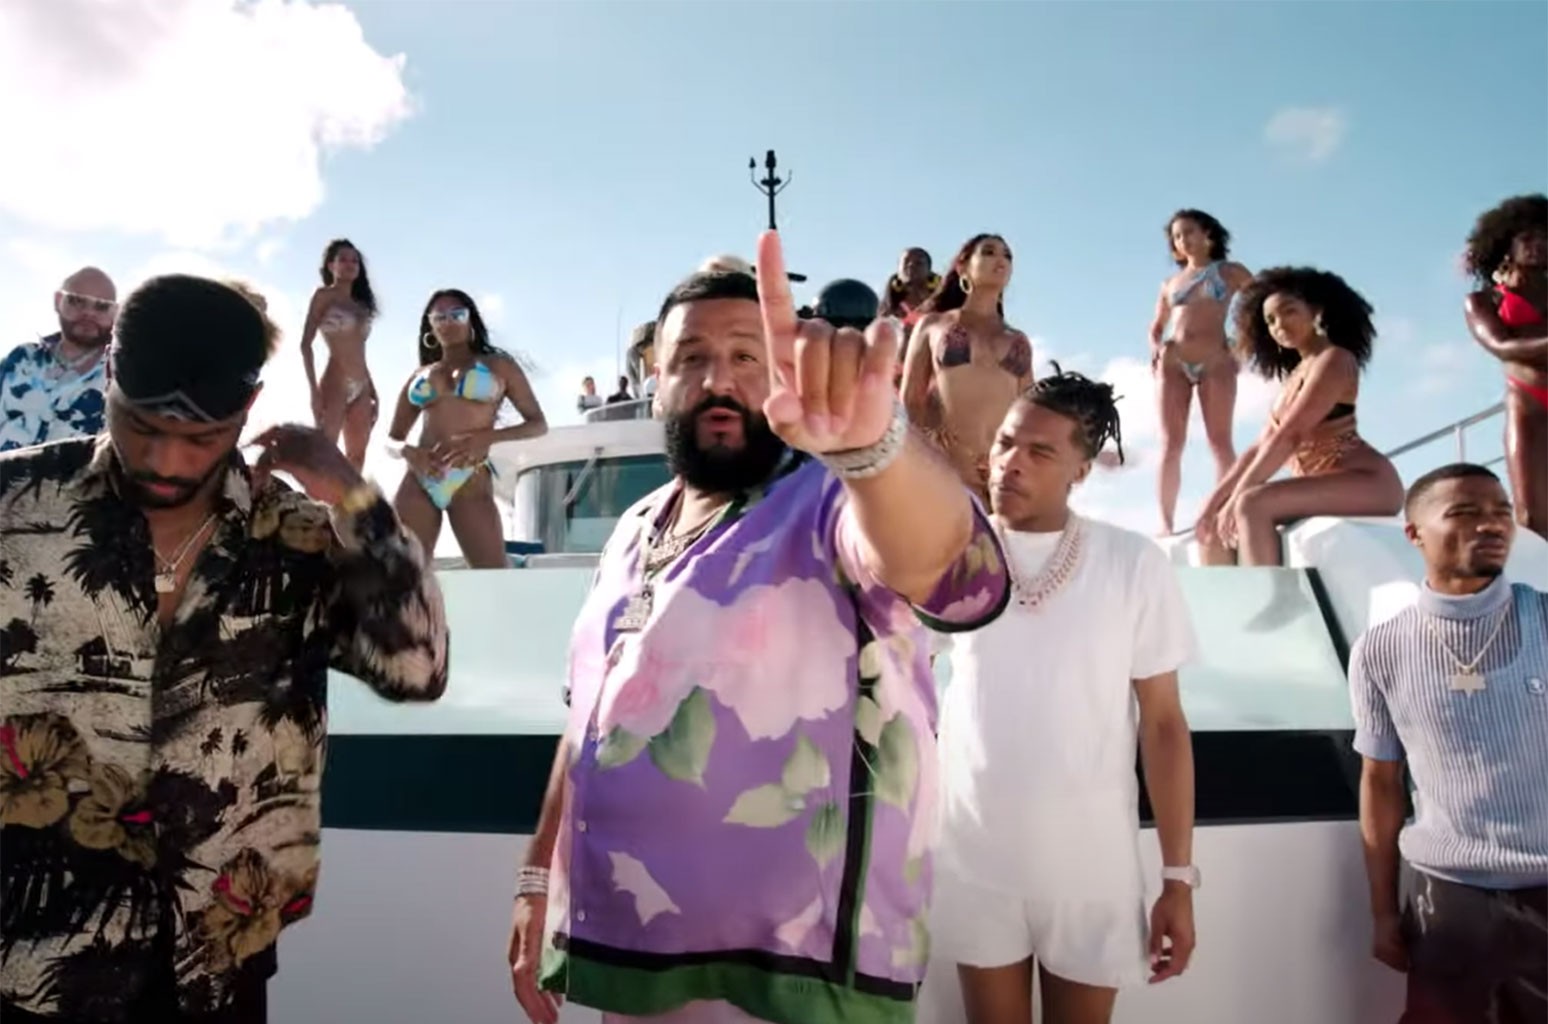 Watch DJ Khaled bring out Lil Wayne, Lil Baby, Migos and more for